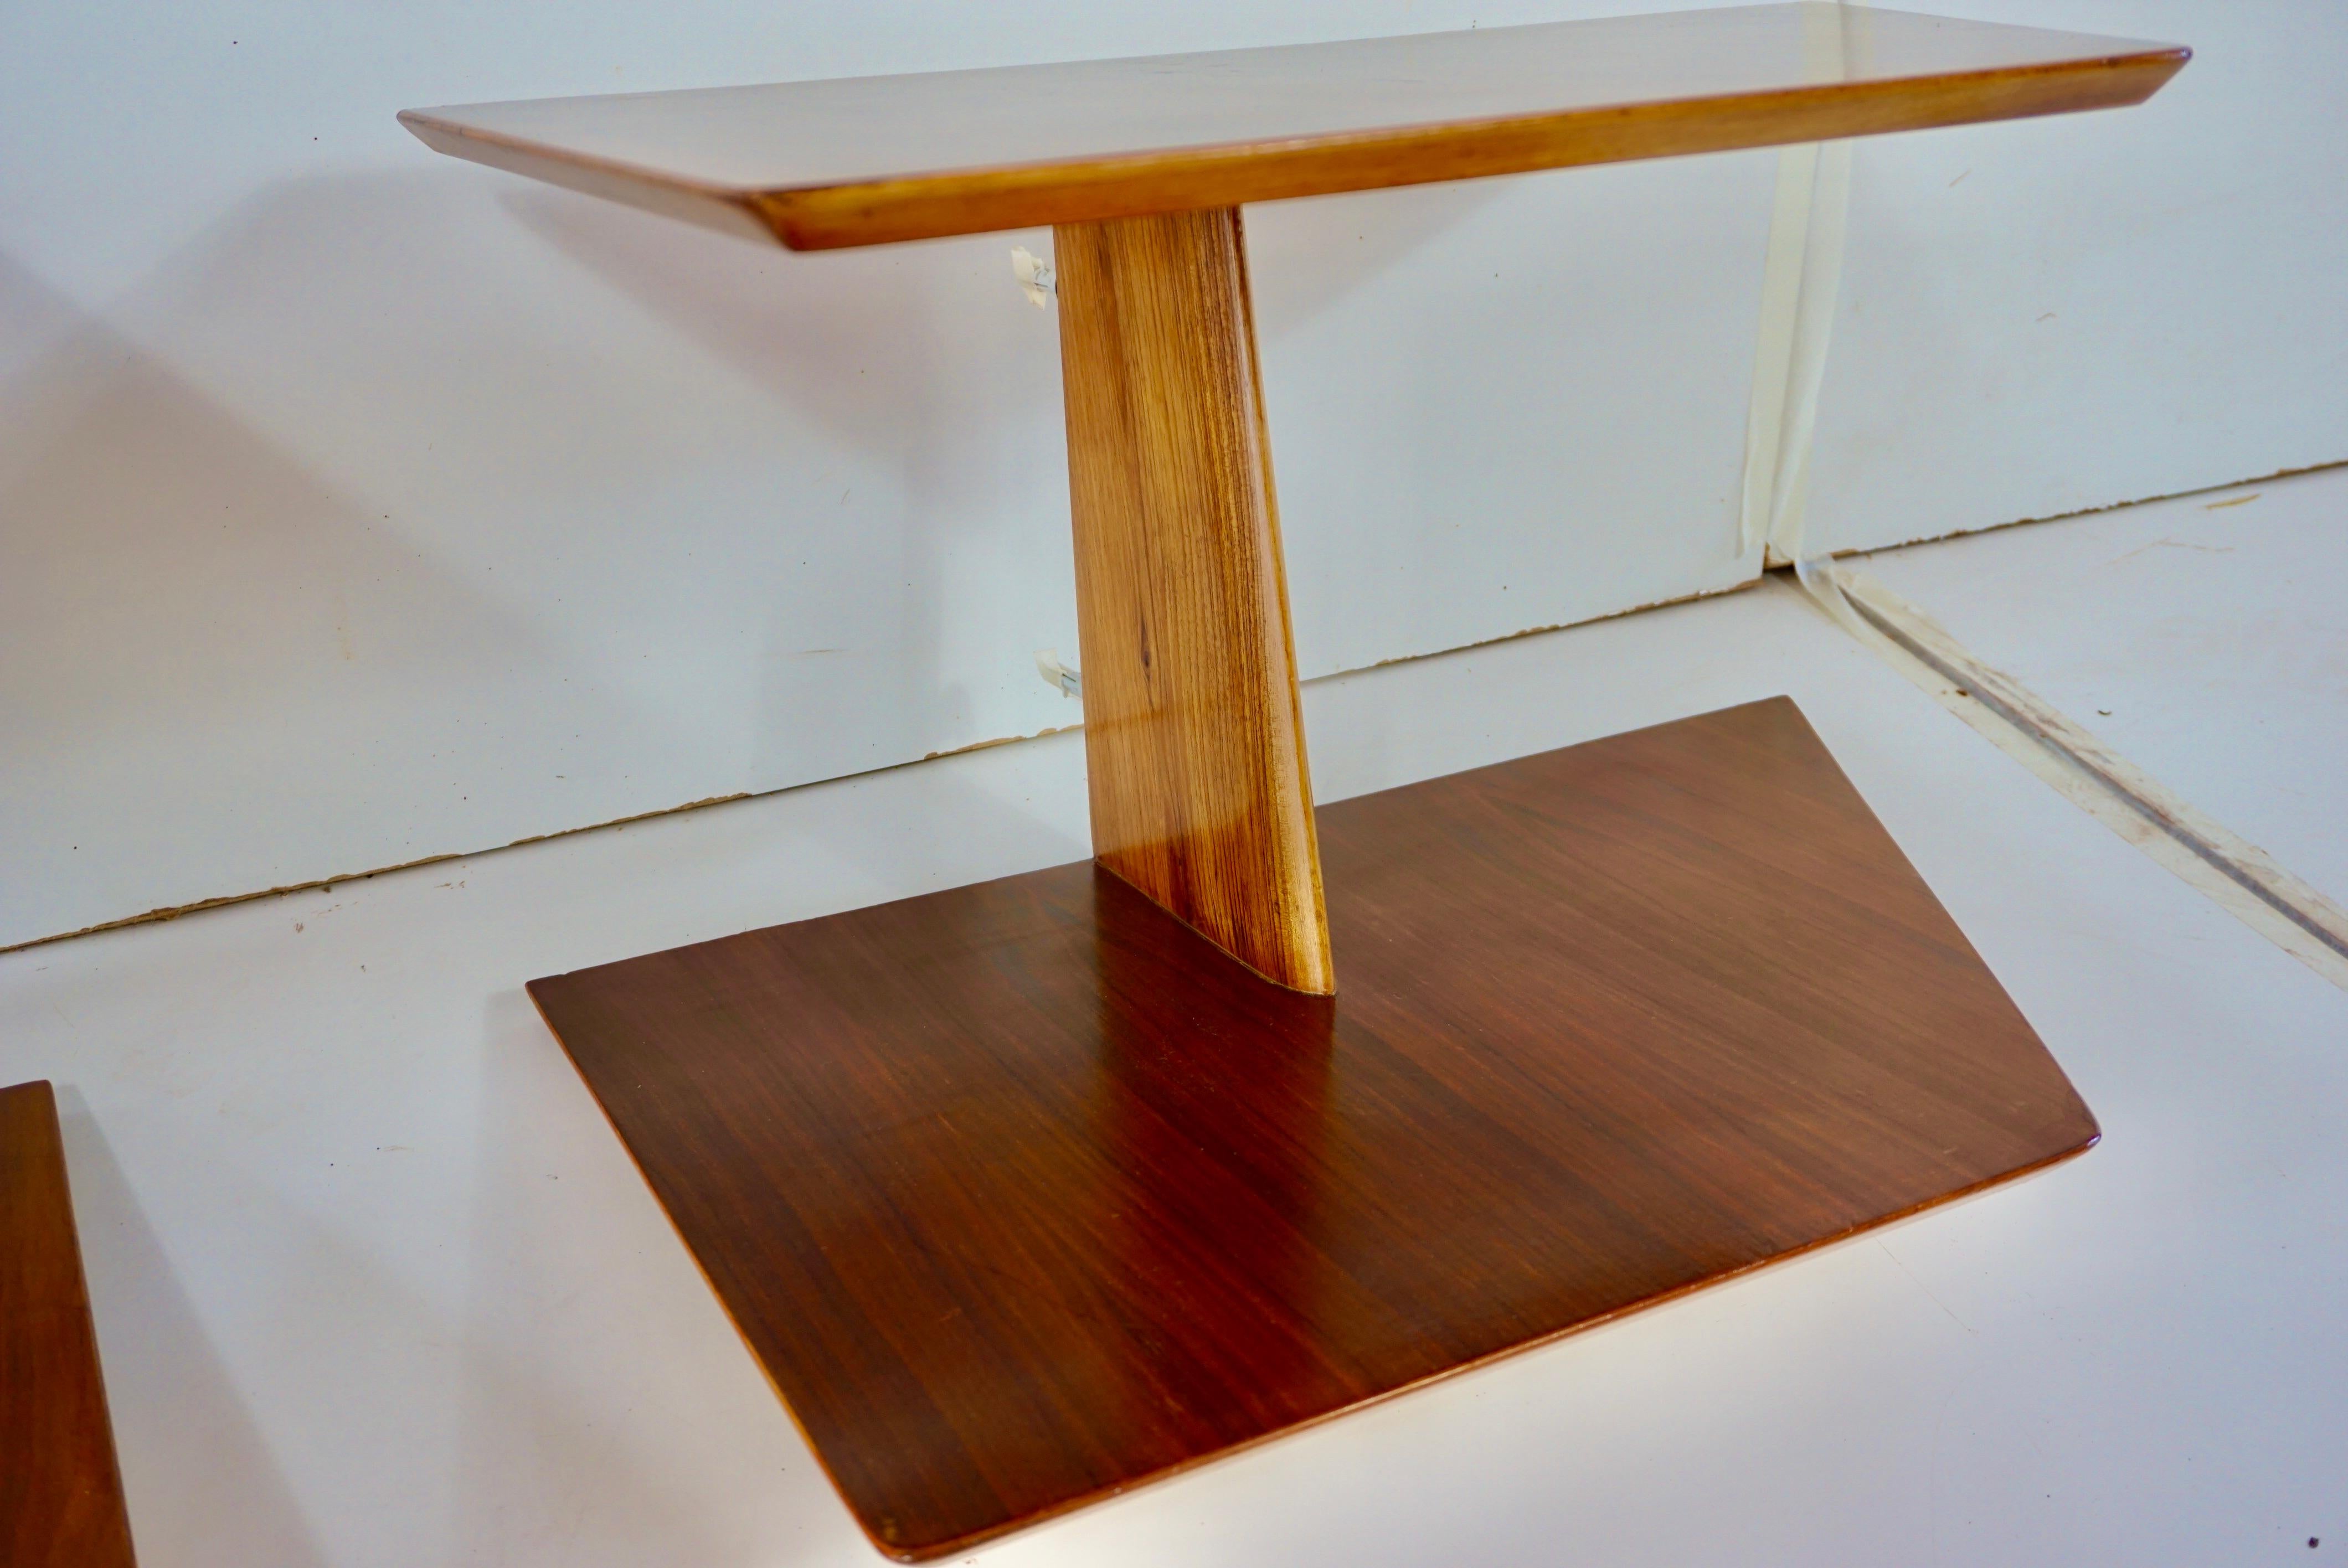 Fruitwood pair of GIO PONTI wood hanging nightstand tables, side tables Hotel Royal, 1955